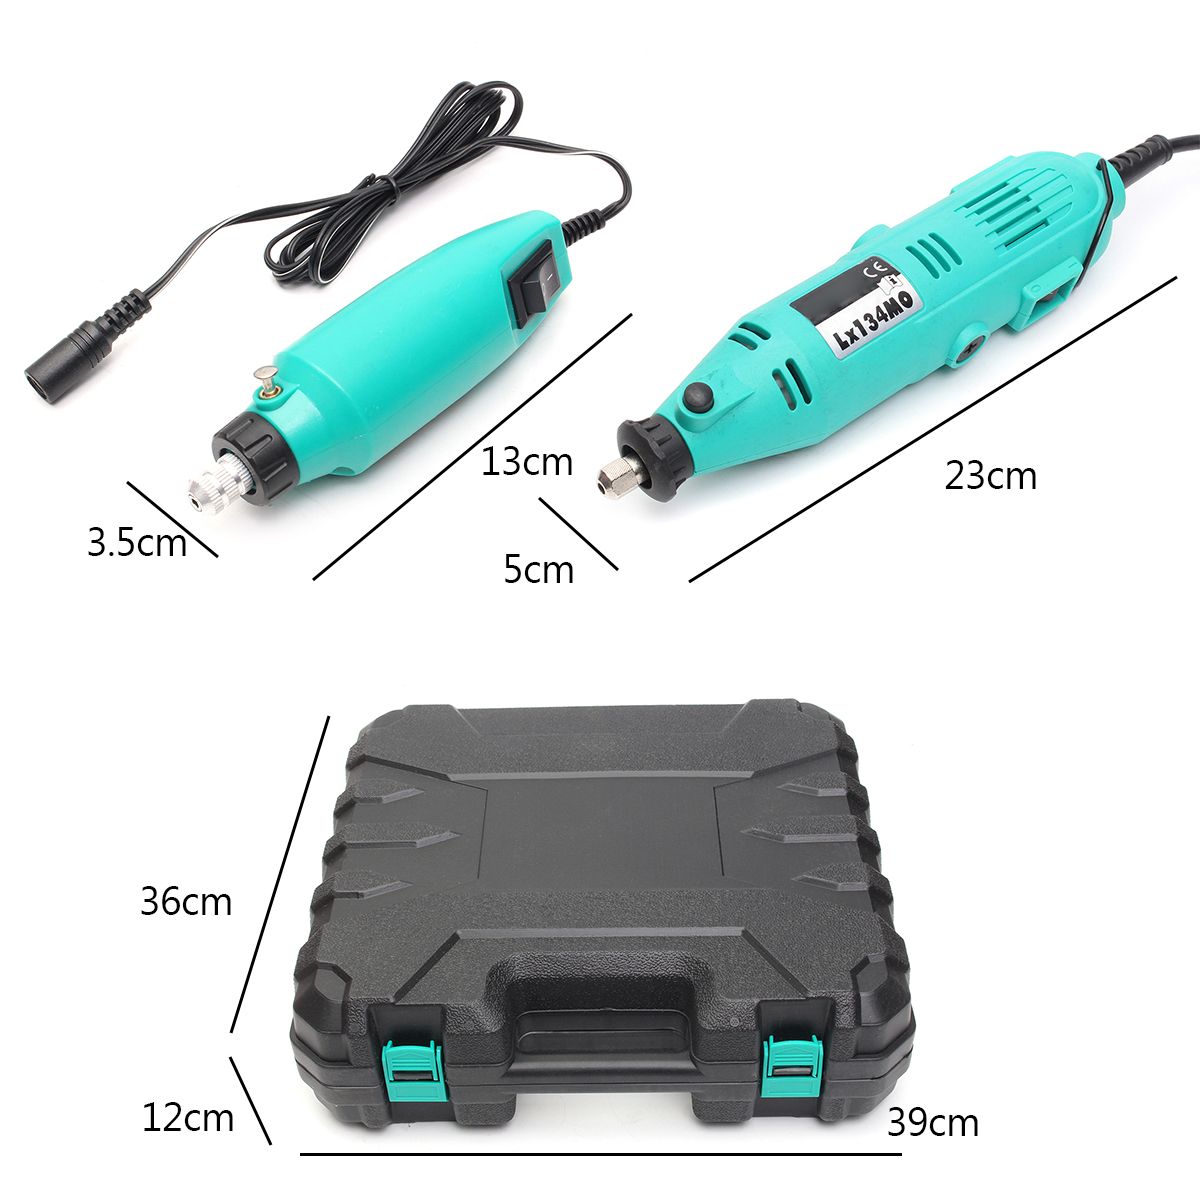 181Pcs-Mini-Drill-Electric-Grinder-Sanding-Polishing-Rotary-Tool-with-Accessory-Set-1299973-3